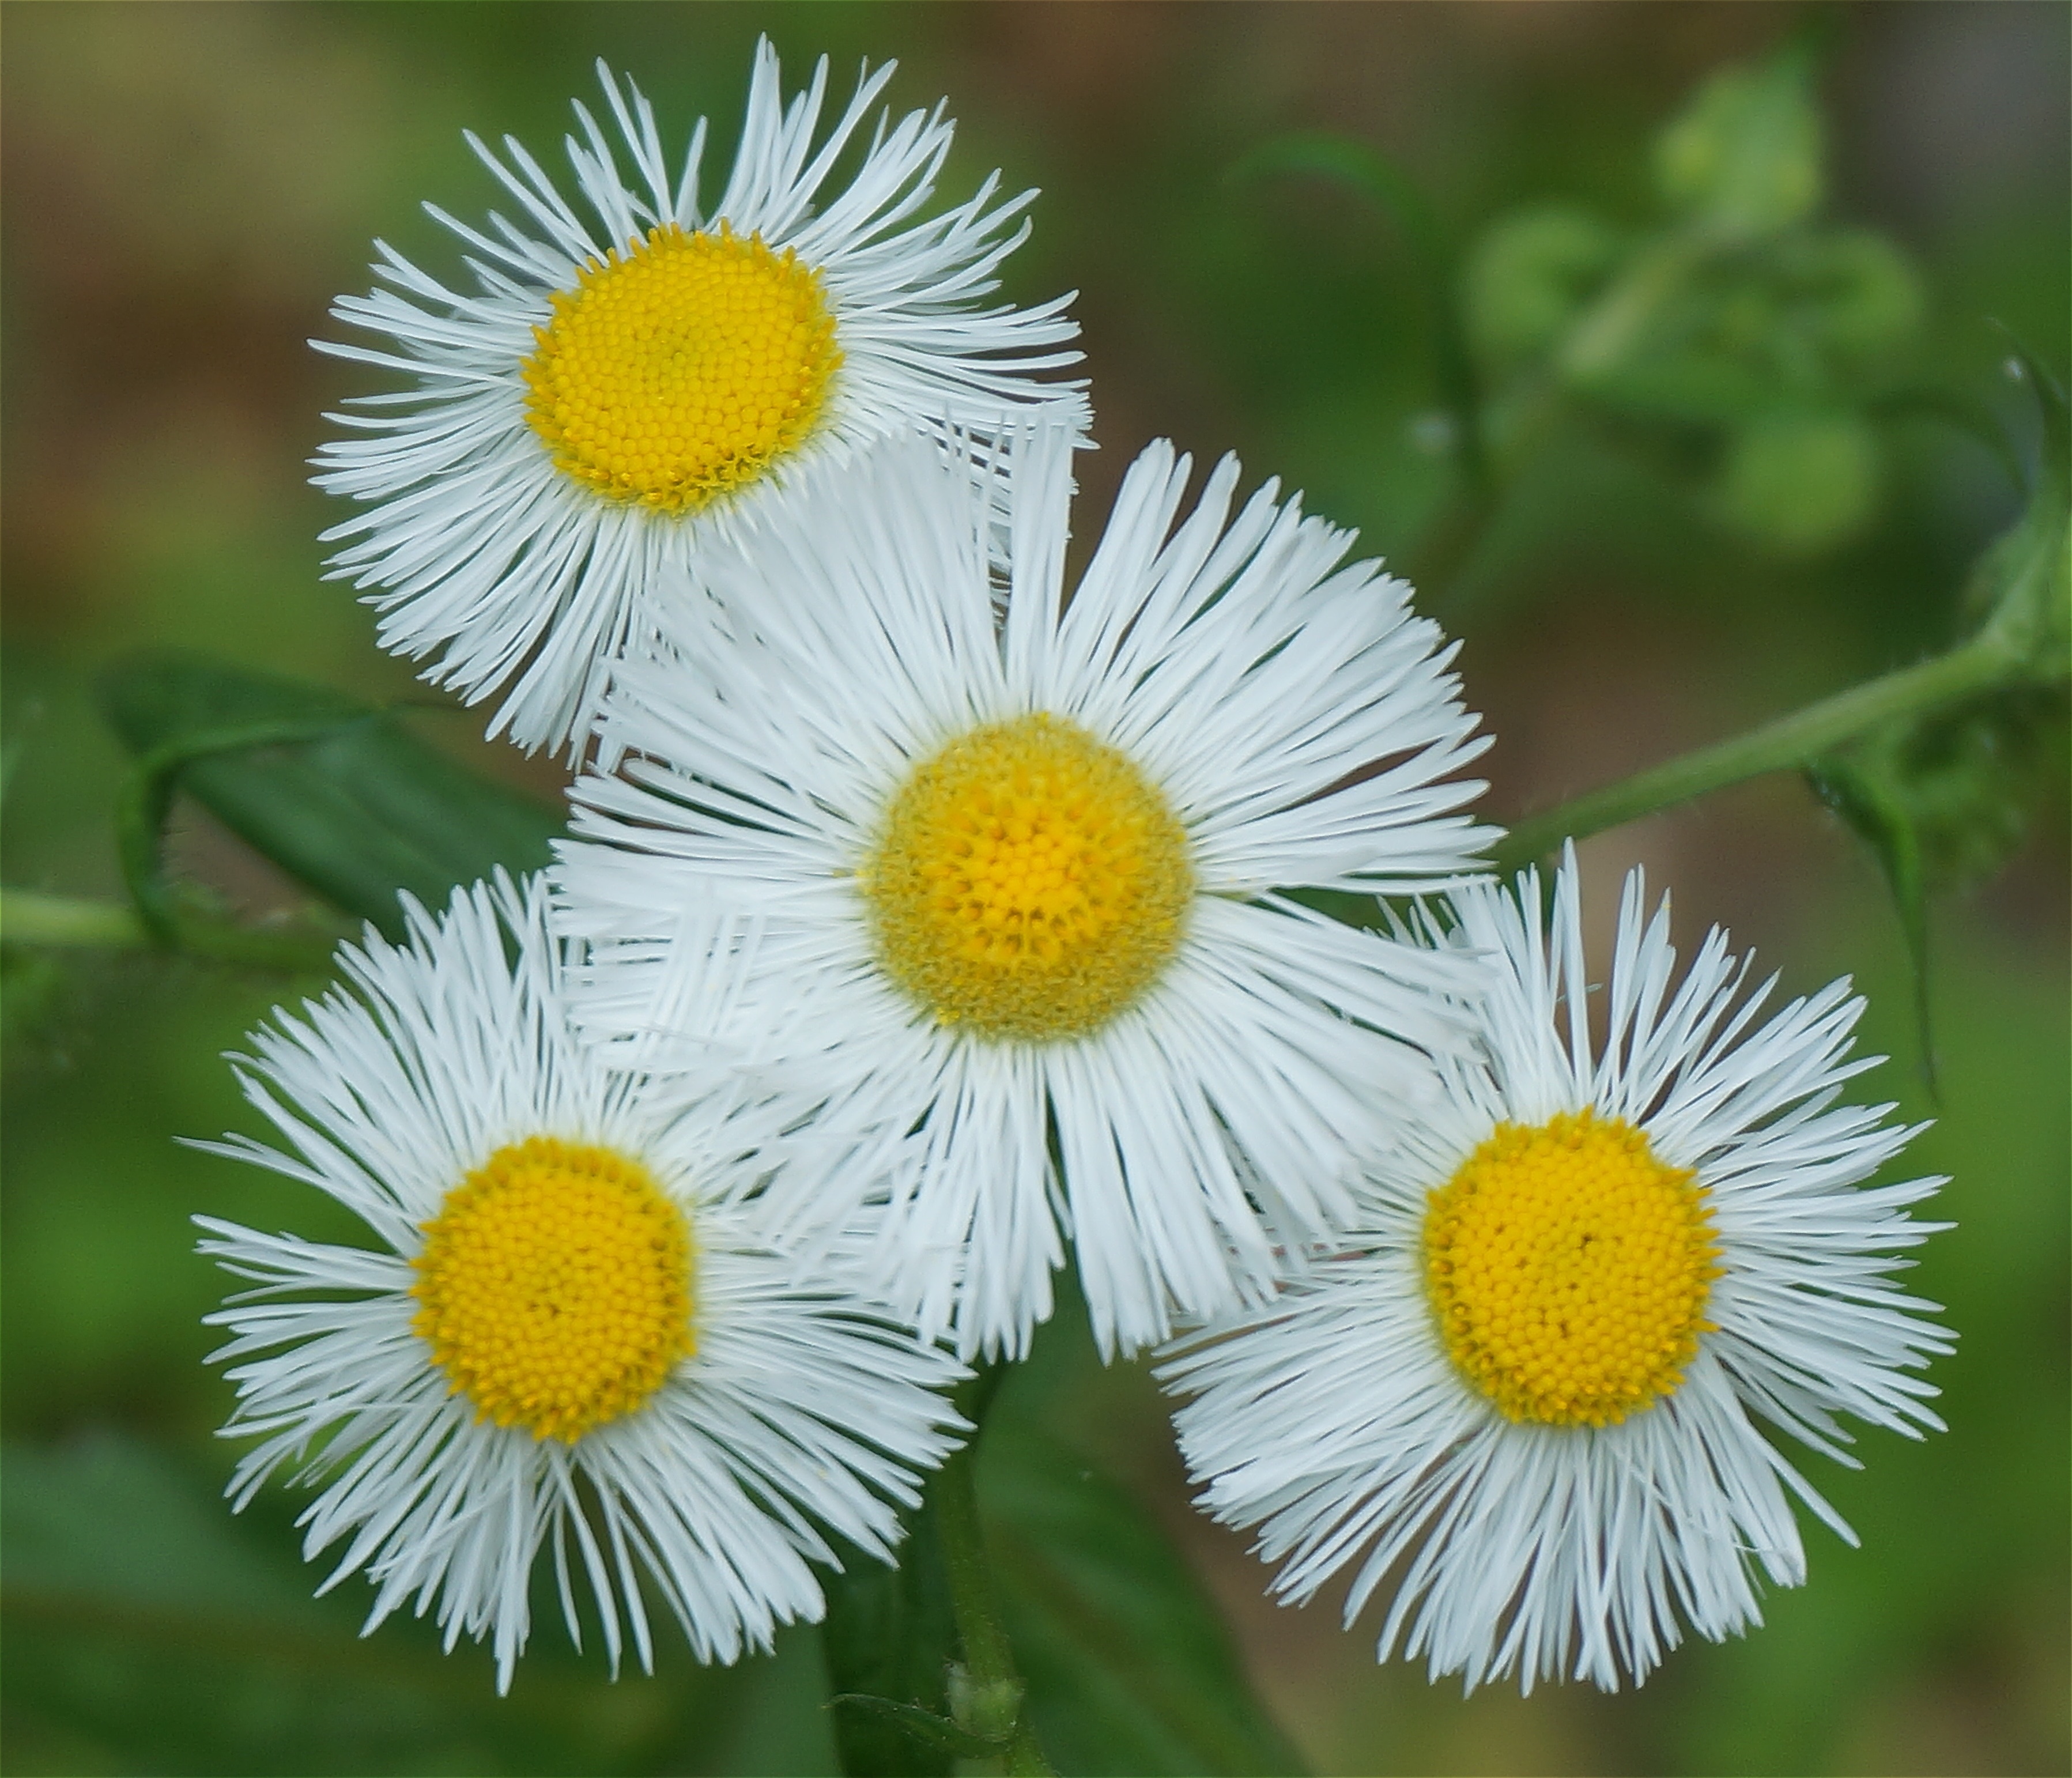 yellow and white flowers